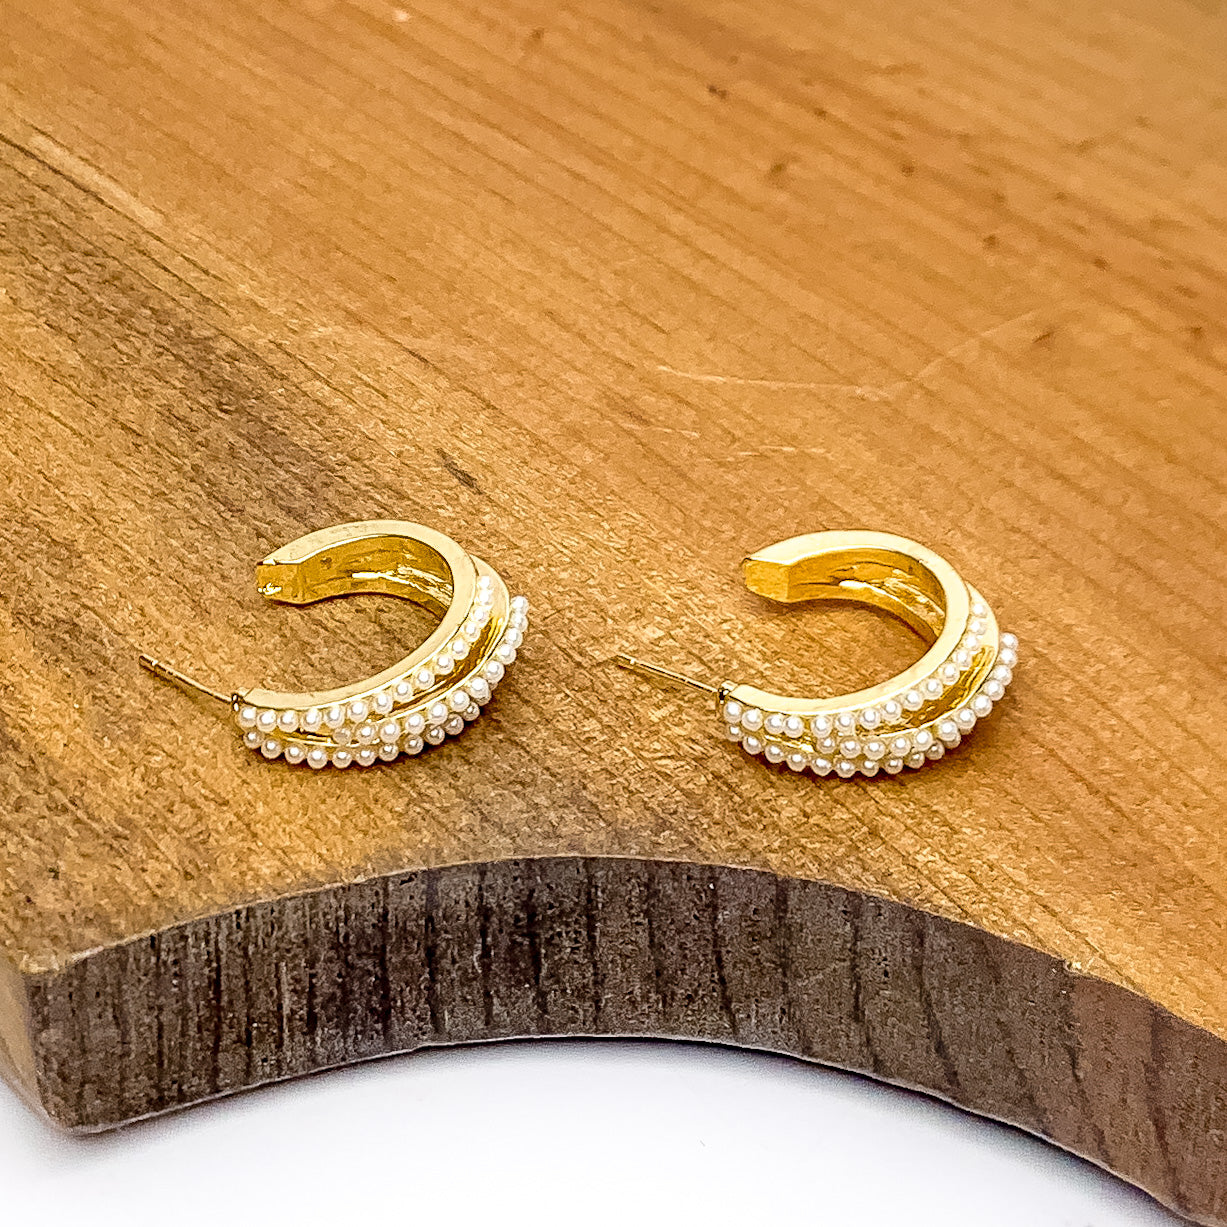 Small Gold Tone Hoop Earrings Outlined in Pearls. Pictured on a piece of wood.